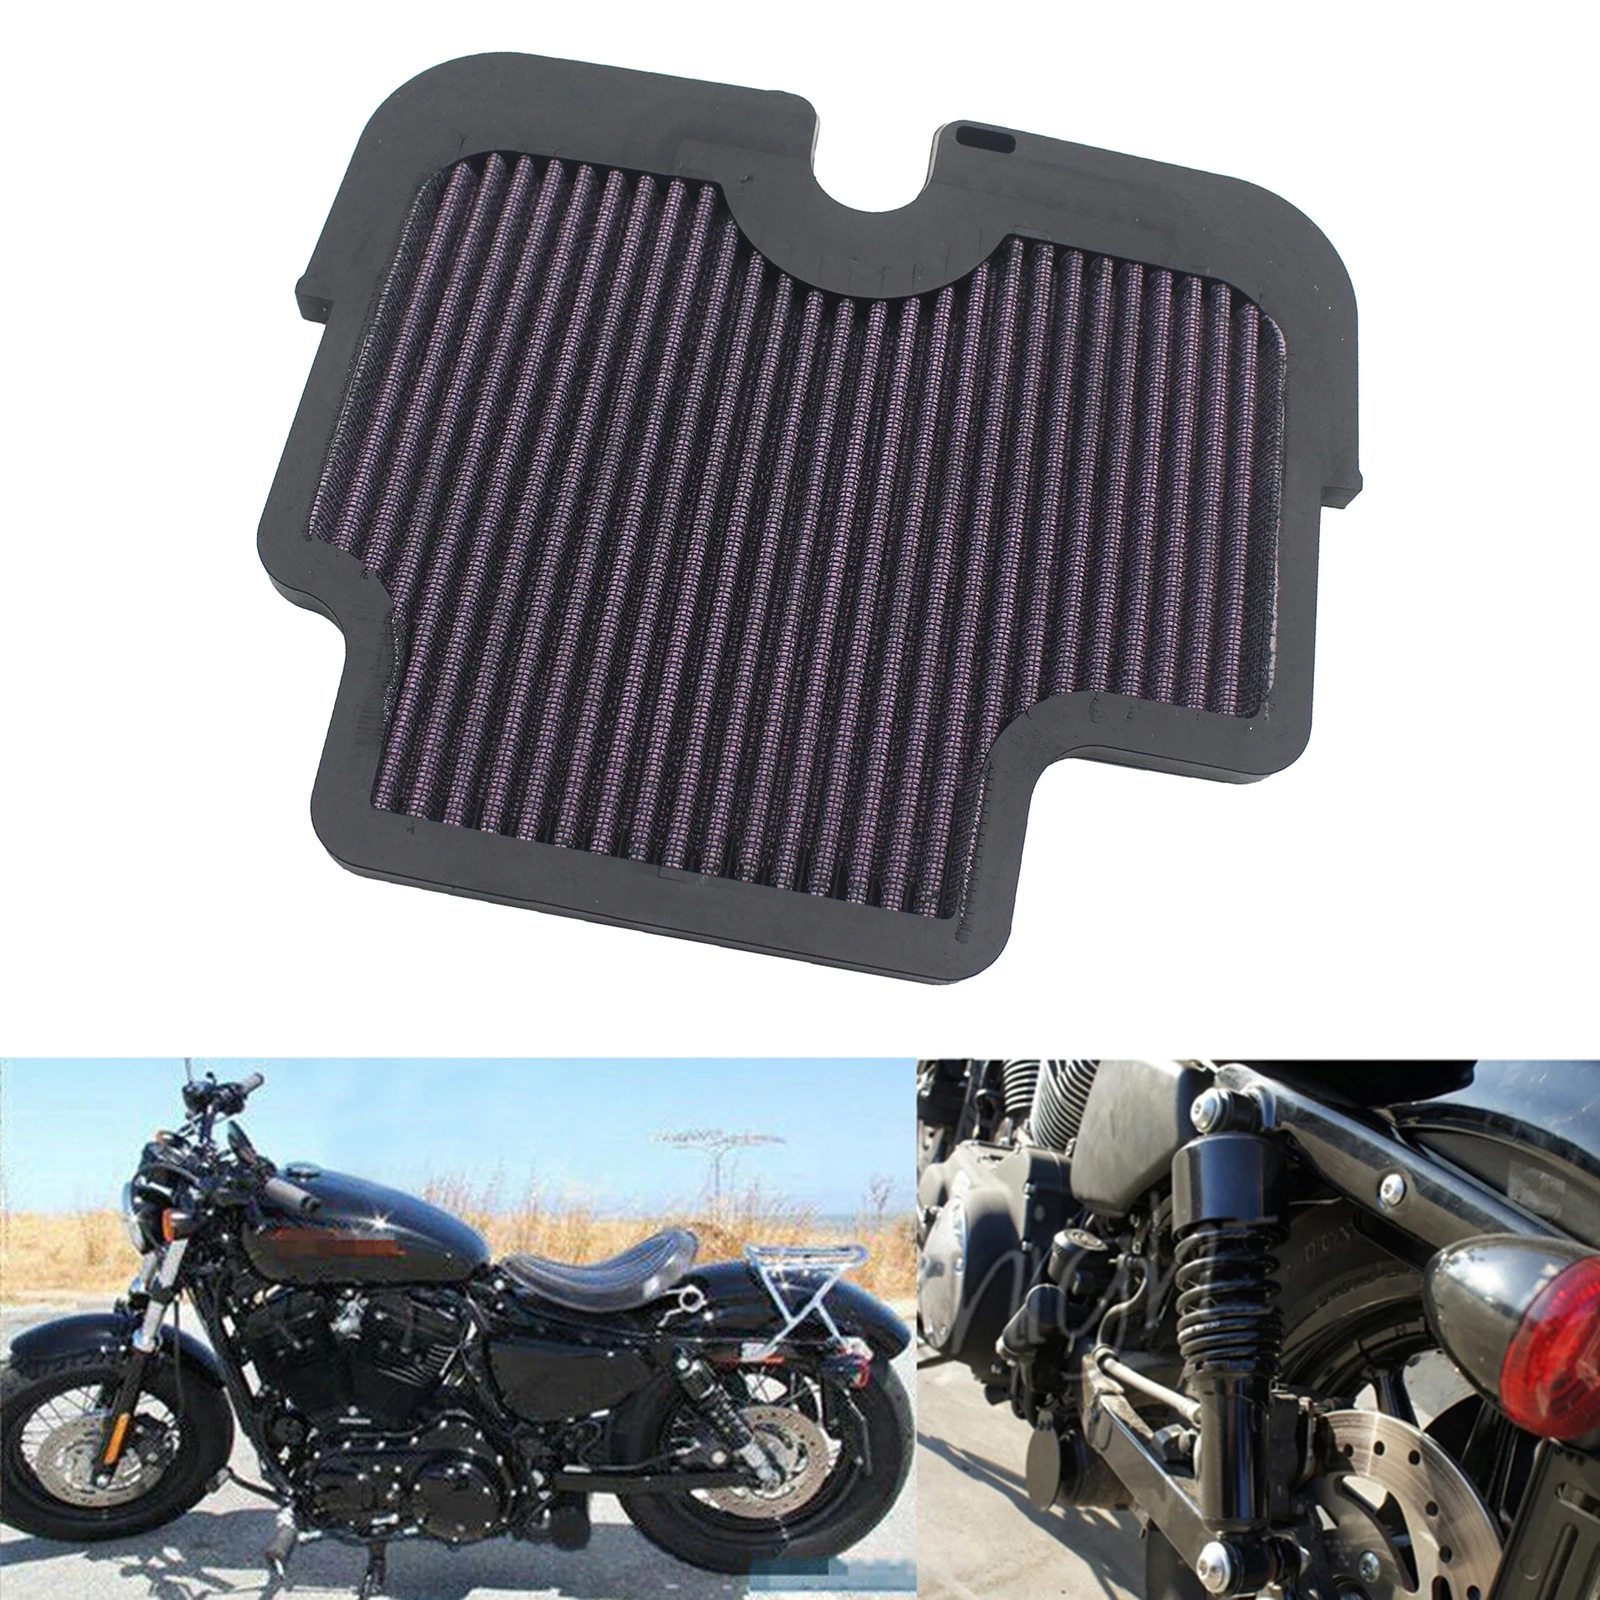 

Motorcycle Air Intake Filter Cleaner, for Kawasaki ER650 ER-6N 2009-2011 Motorbike Replace Accessories, Easy to Install